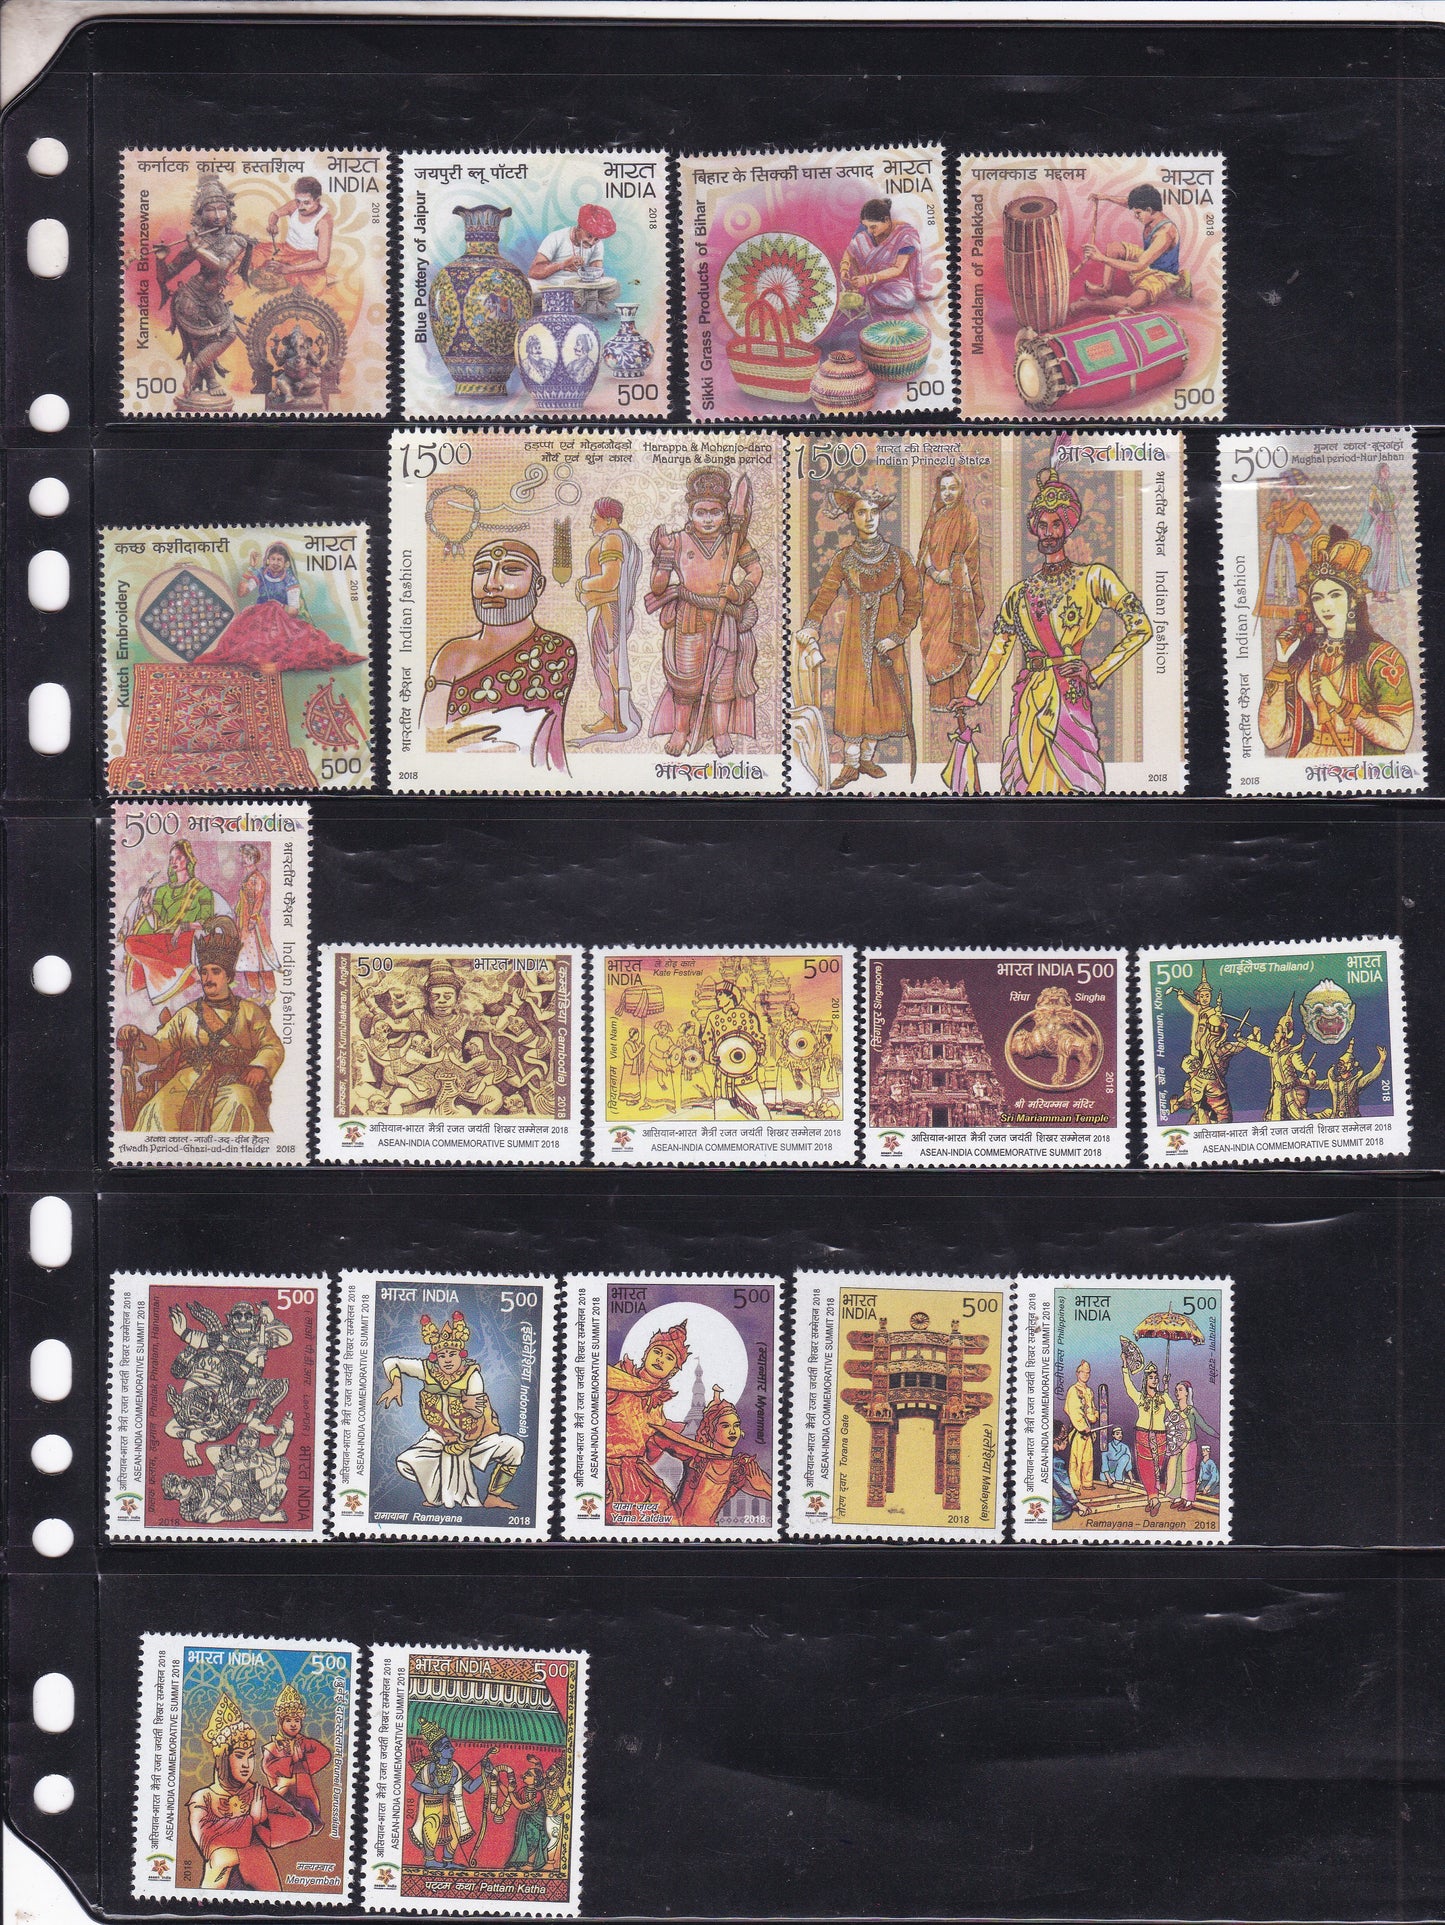 India-2018 Full Year pack MNH Stamps.